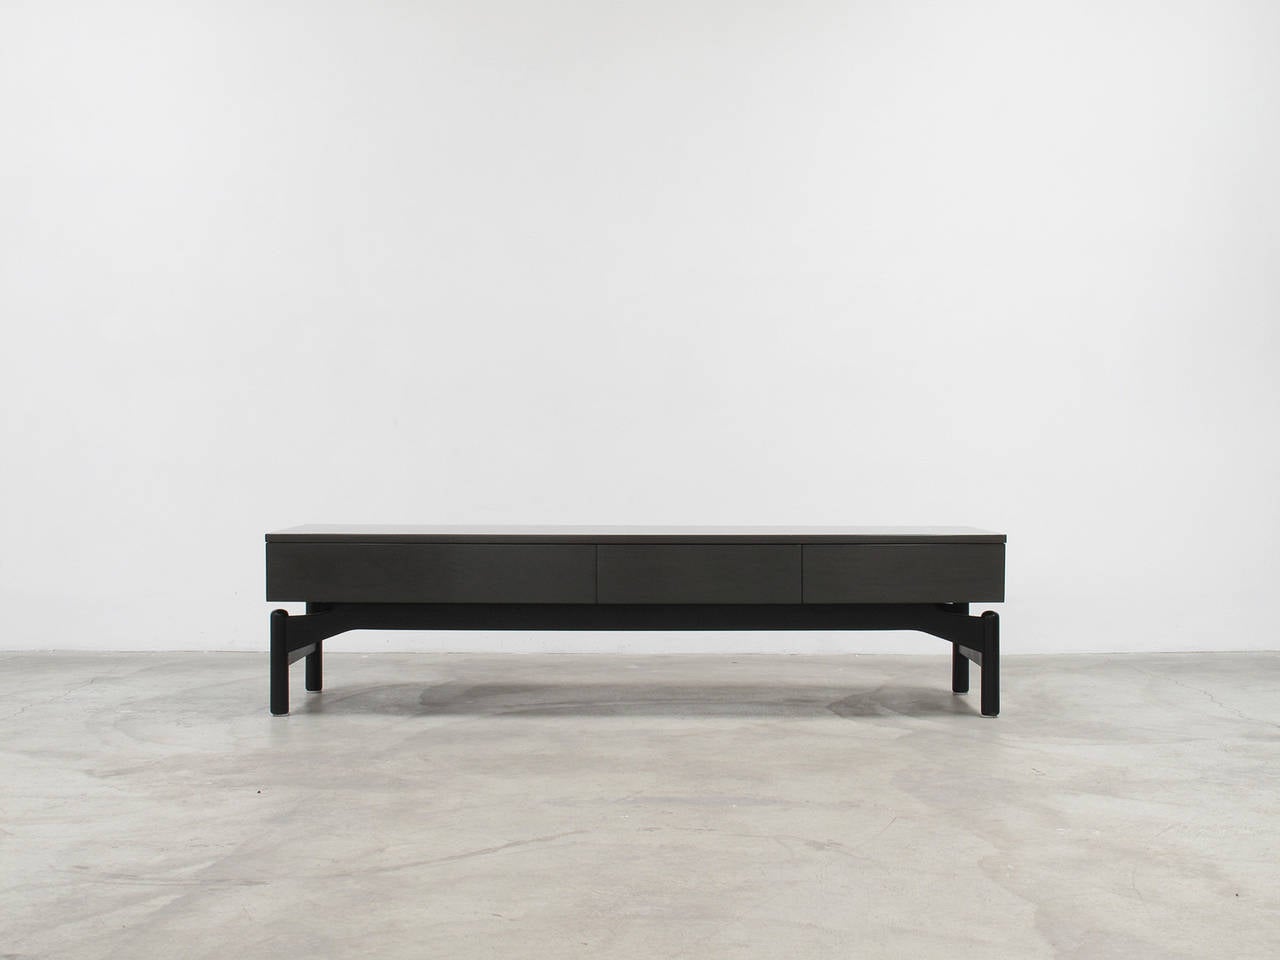 Greta Grossman
Bench or table with three-drawers
Wood, lacquered gray and black
California Modern Design
Glenn of California, 1960s
Measurements in inches: 16.25 high x 64.75 wide x 17.75 deep
Condition: very good vintage, presents well from